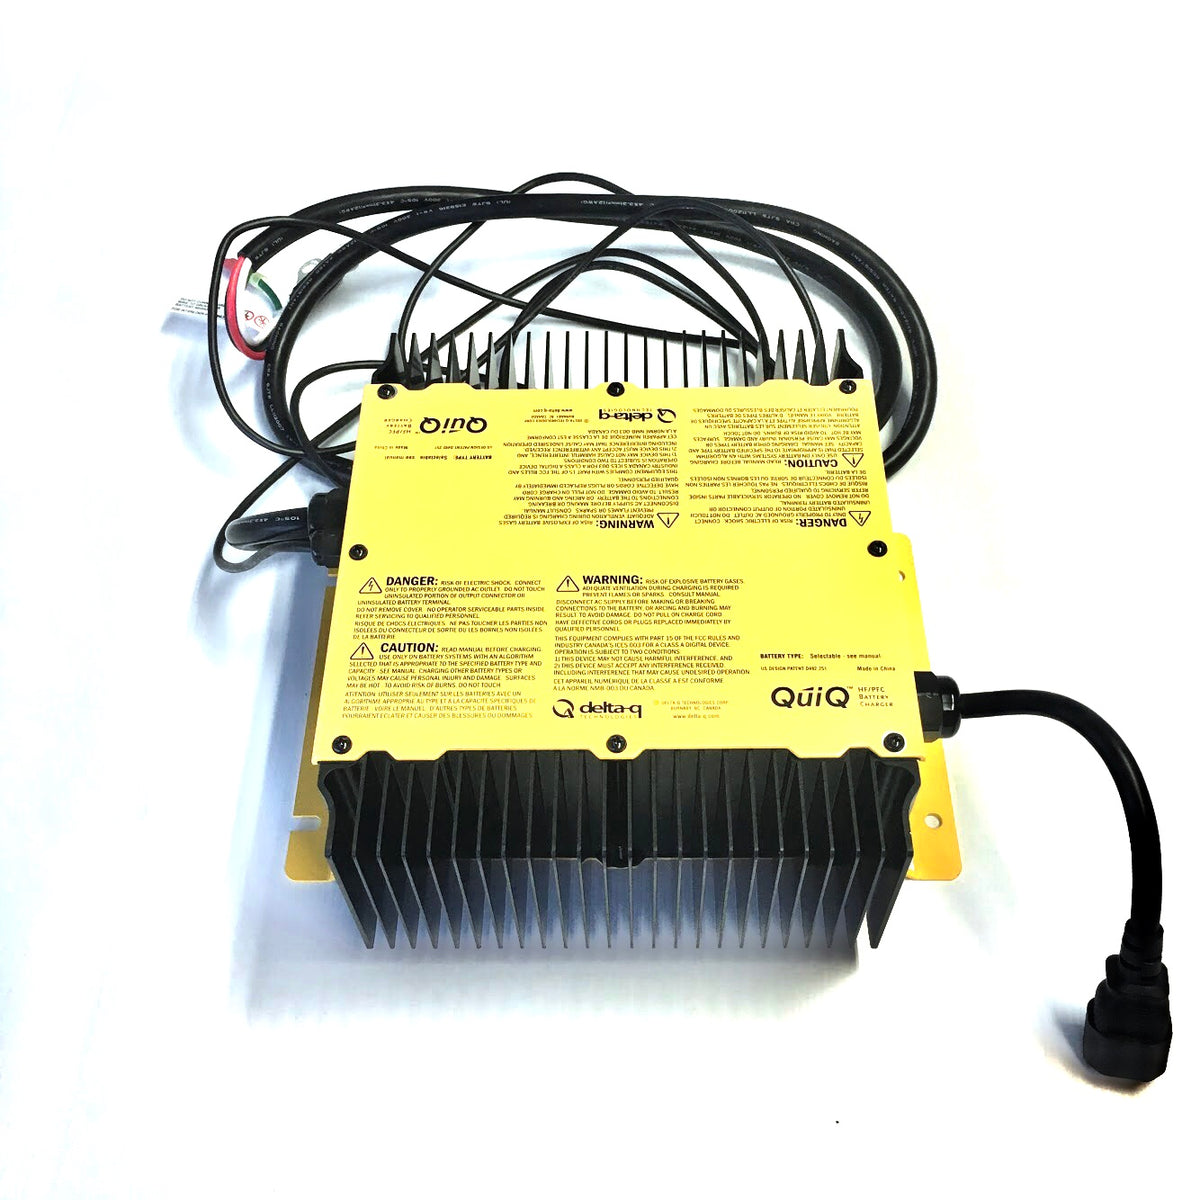 EMC CHARGER, DELTA Q QUIQ 1000, 48V 18A  ON BOARD CHARGER